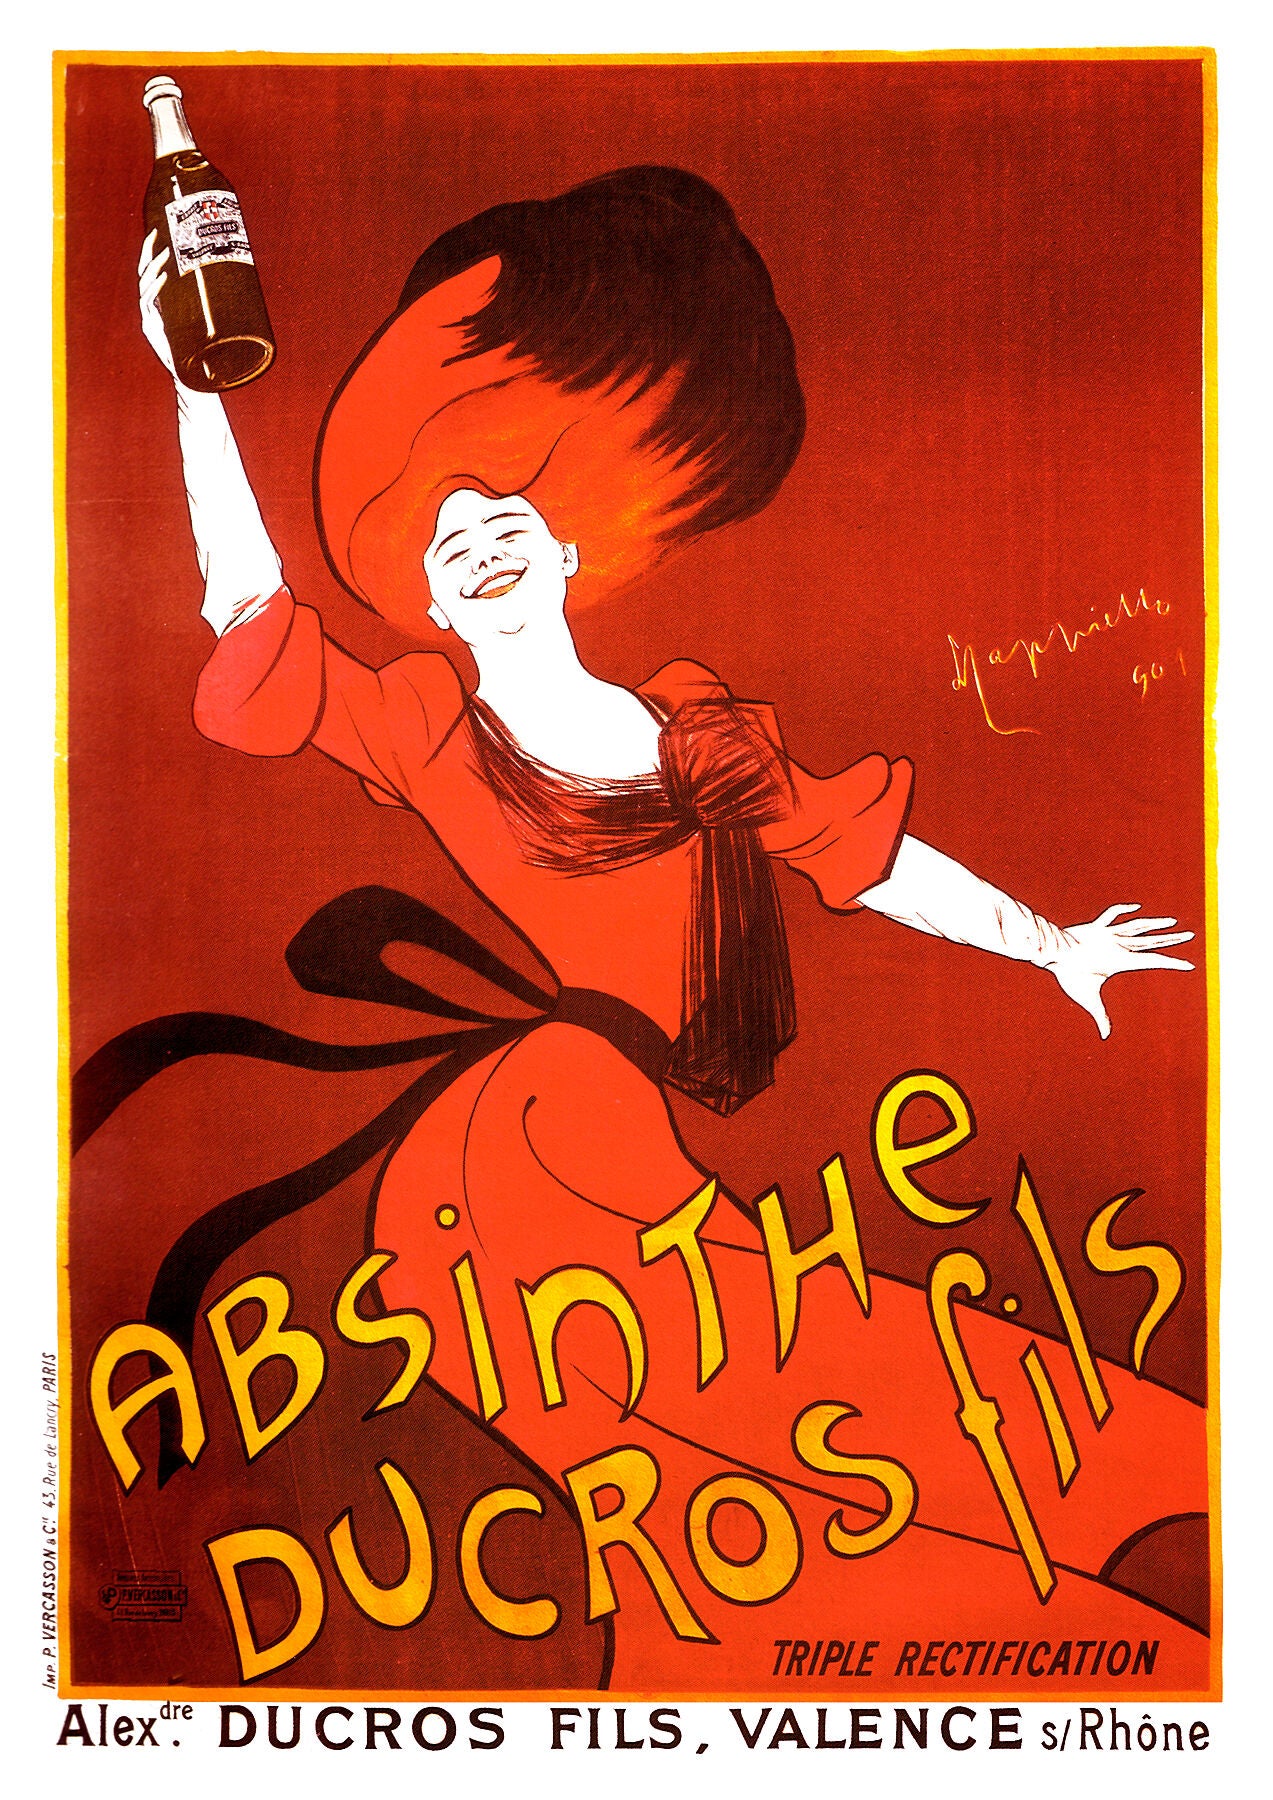 Absinthe Ducros Fils poster by Leonetto Cappiello